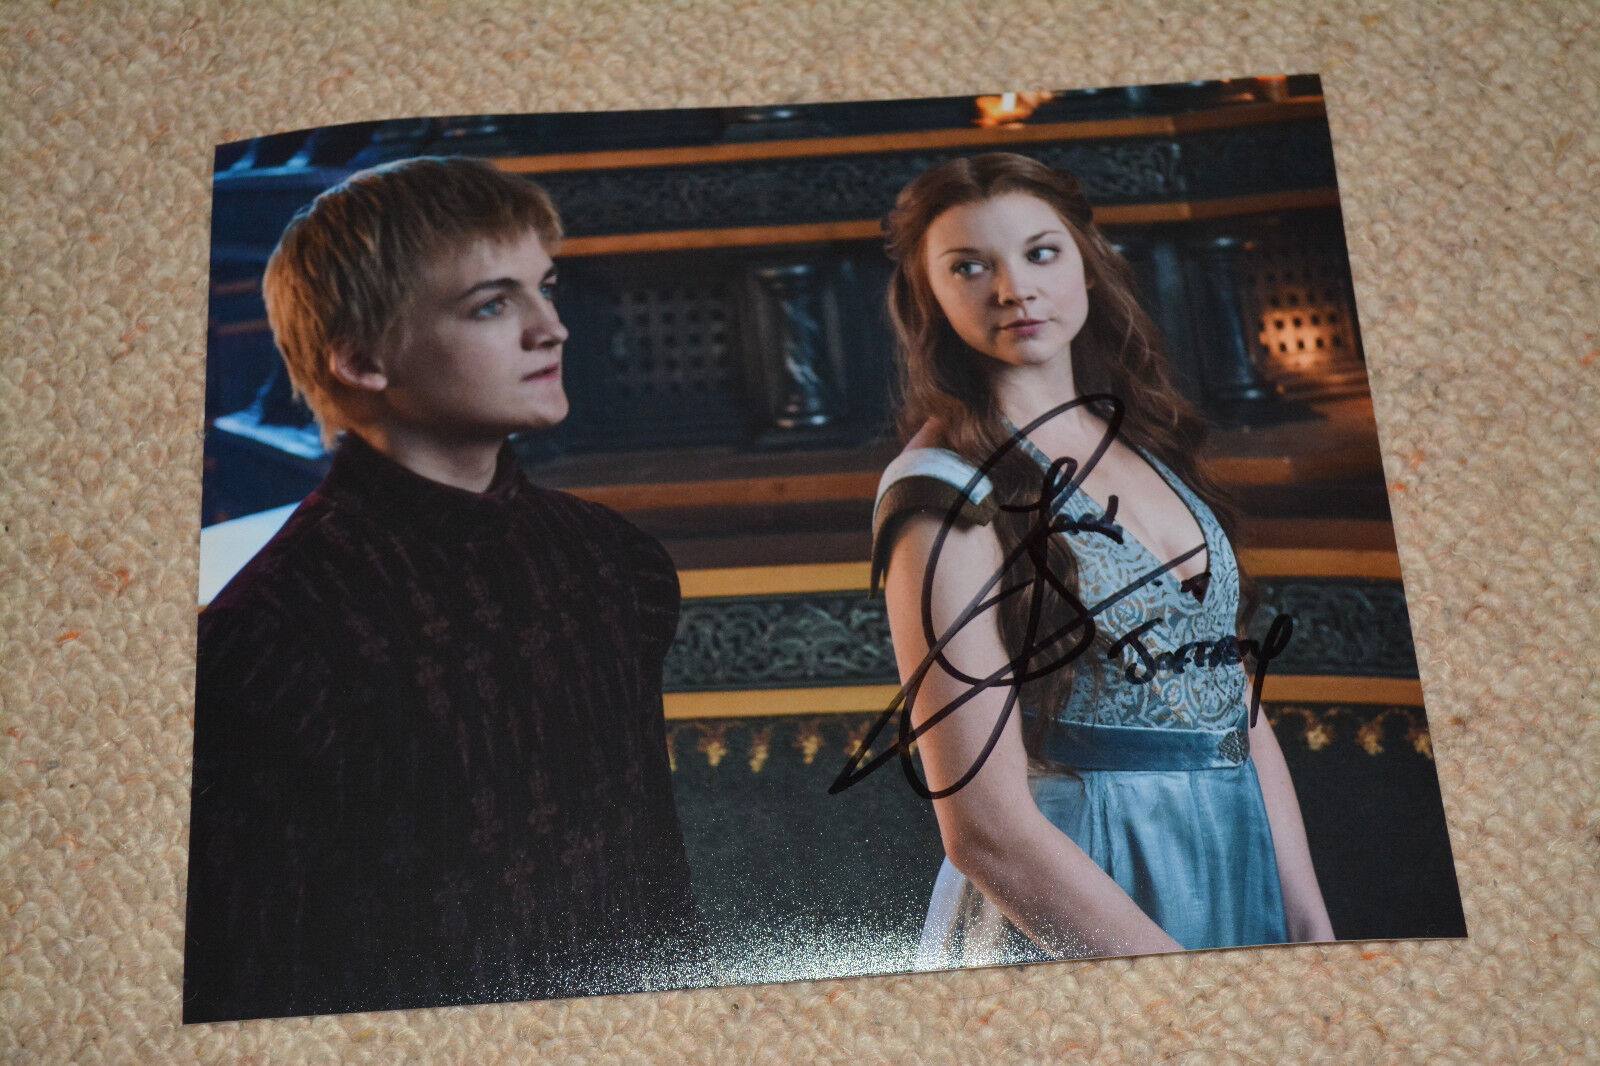 JACK GLEESON signed autograph In Person 8x10 20x25cm GAME OF THRONES